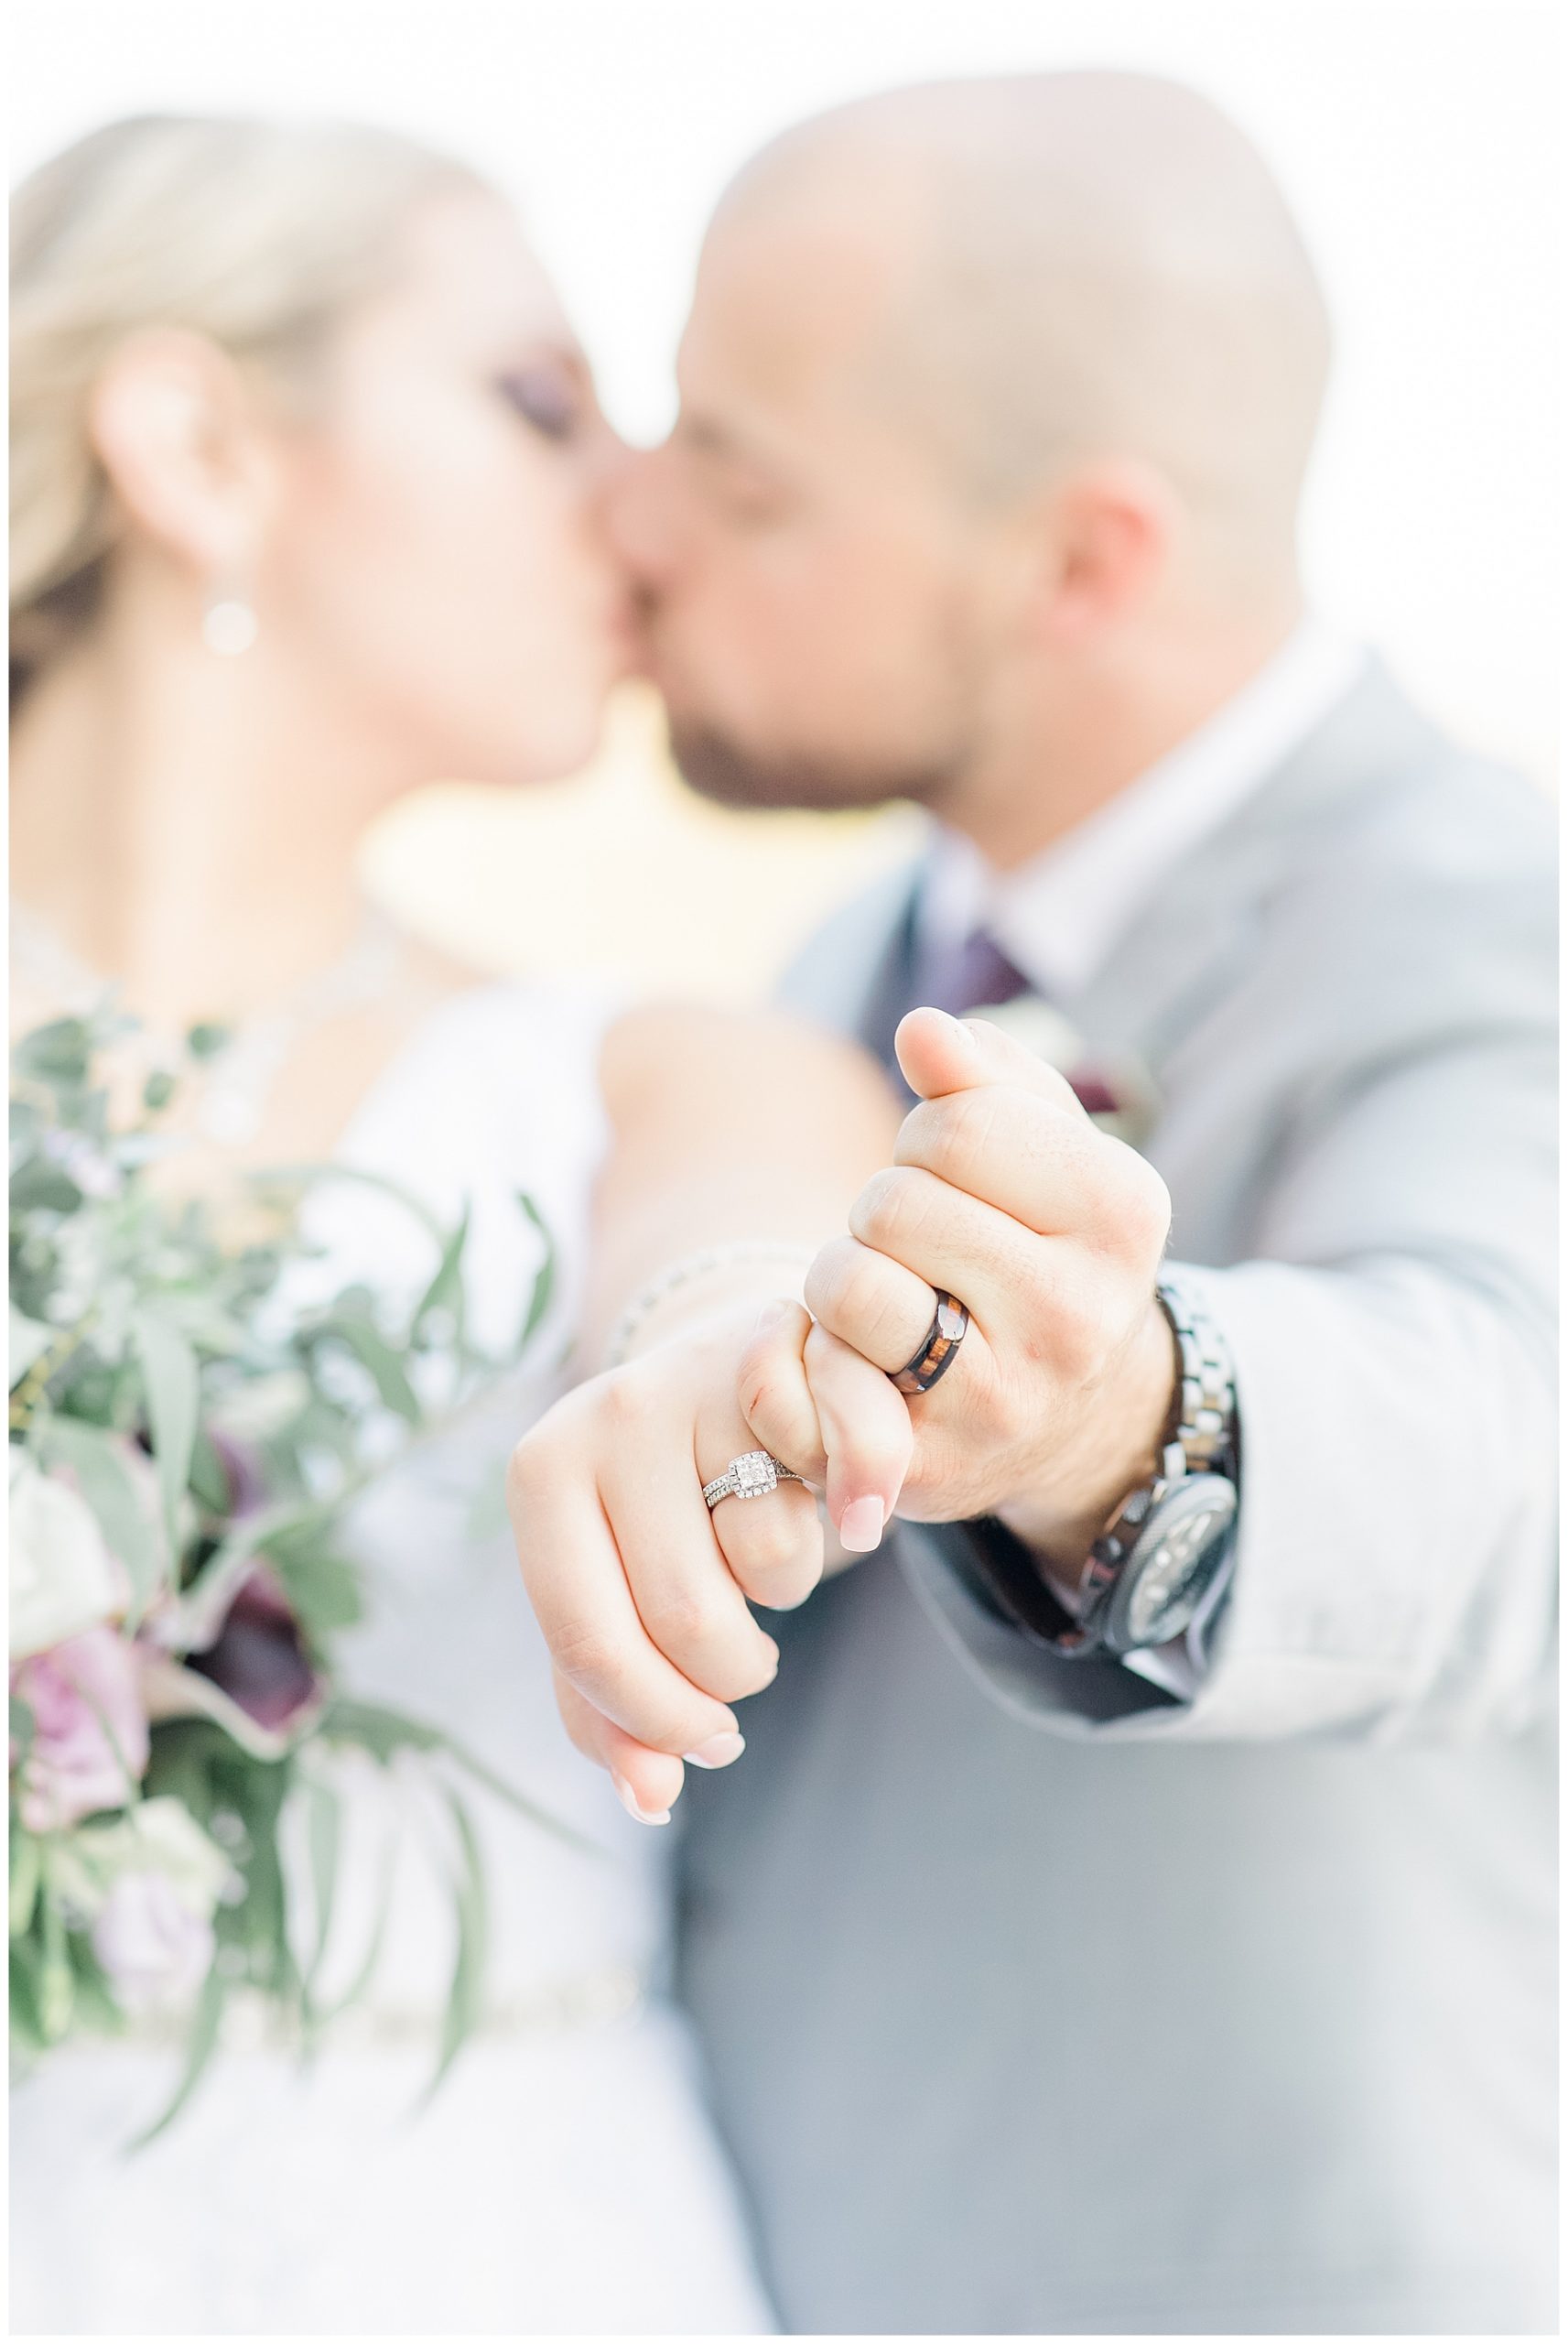 newlyweds kiss and show off wedding rings